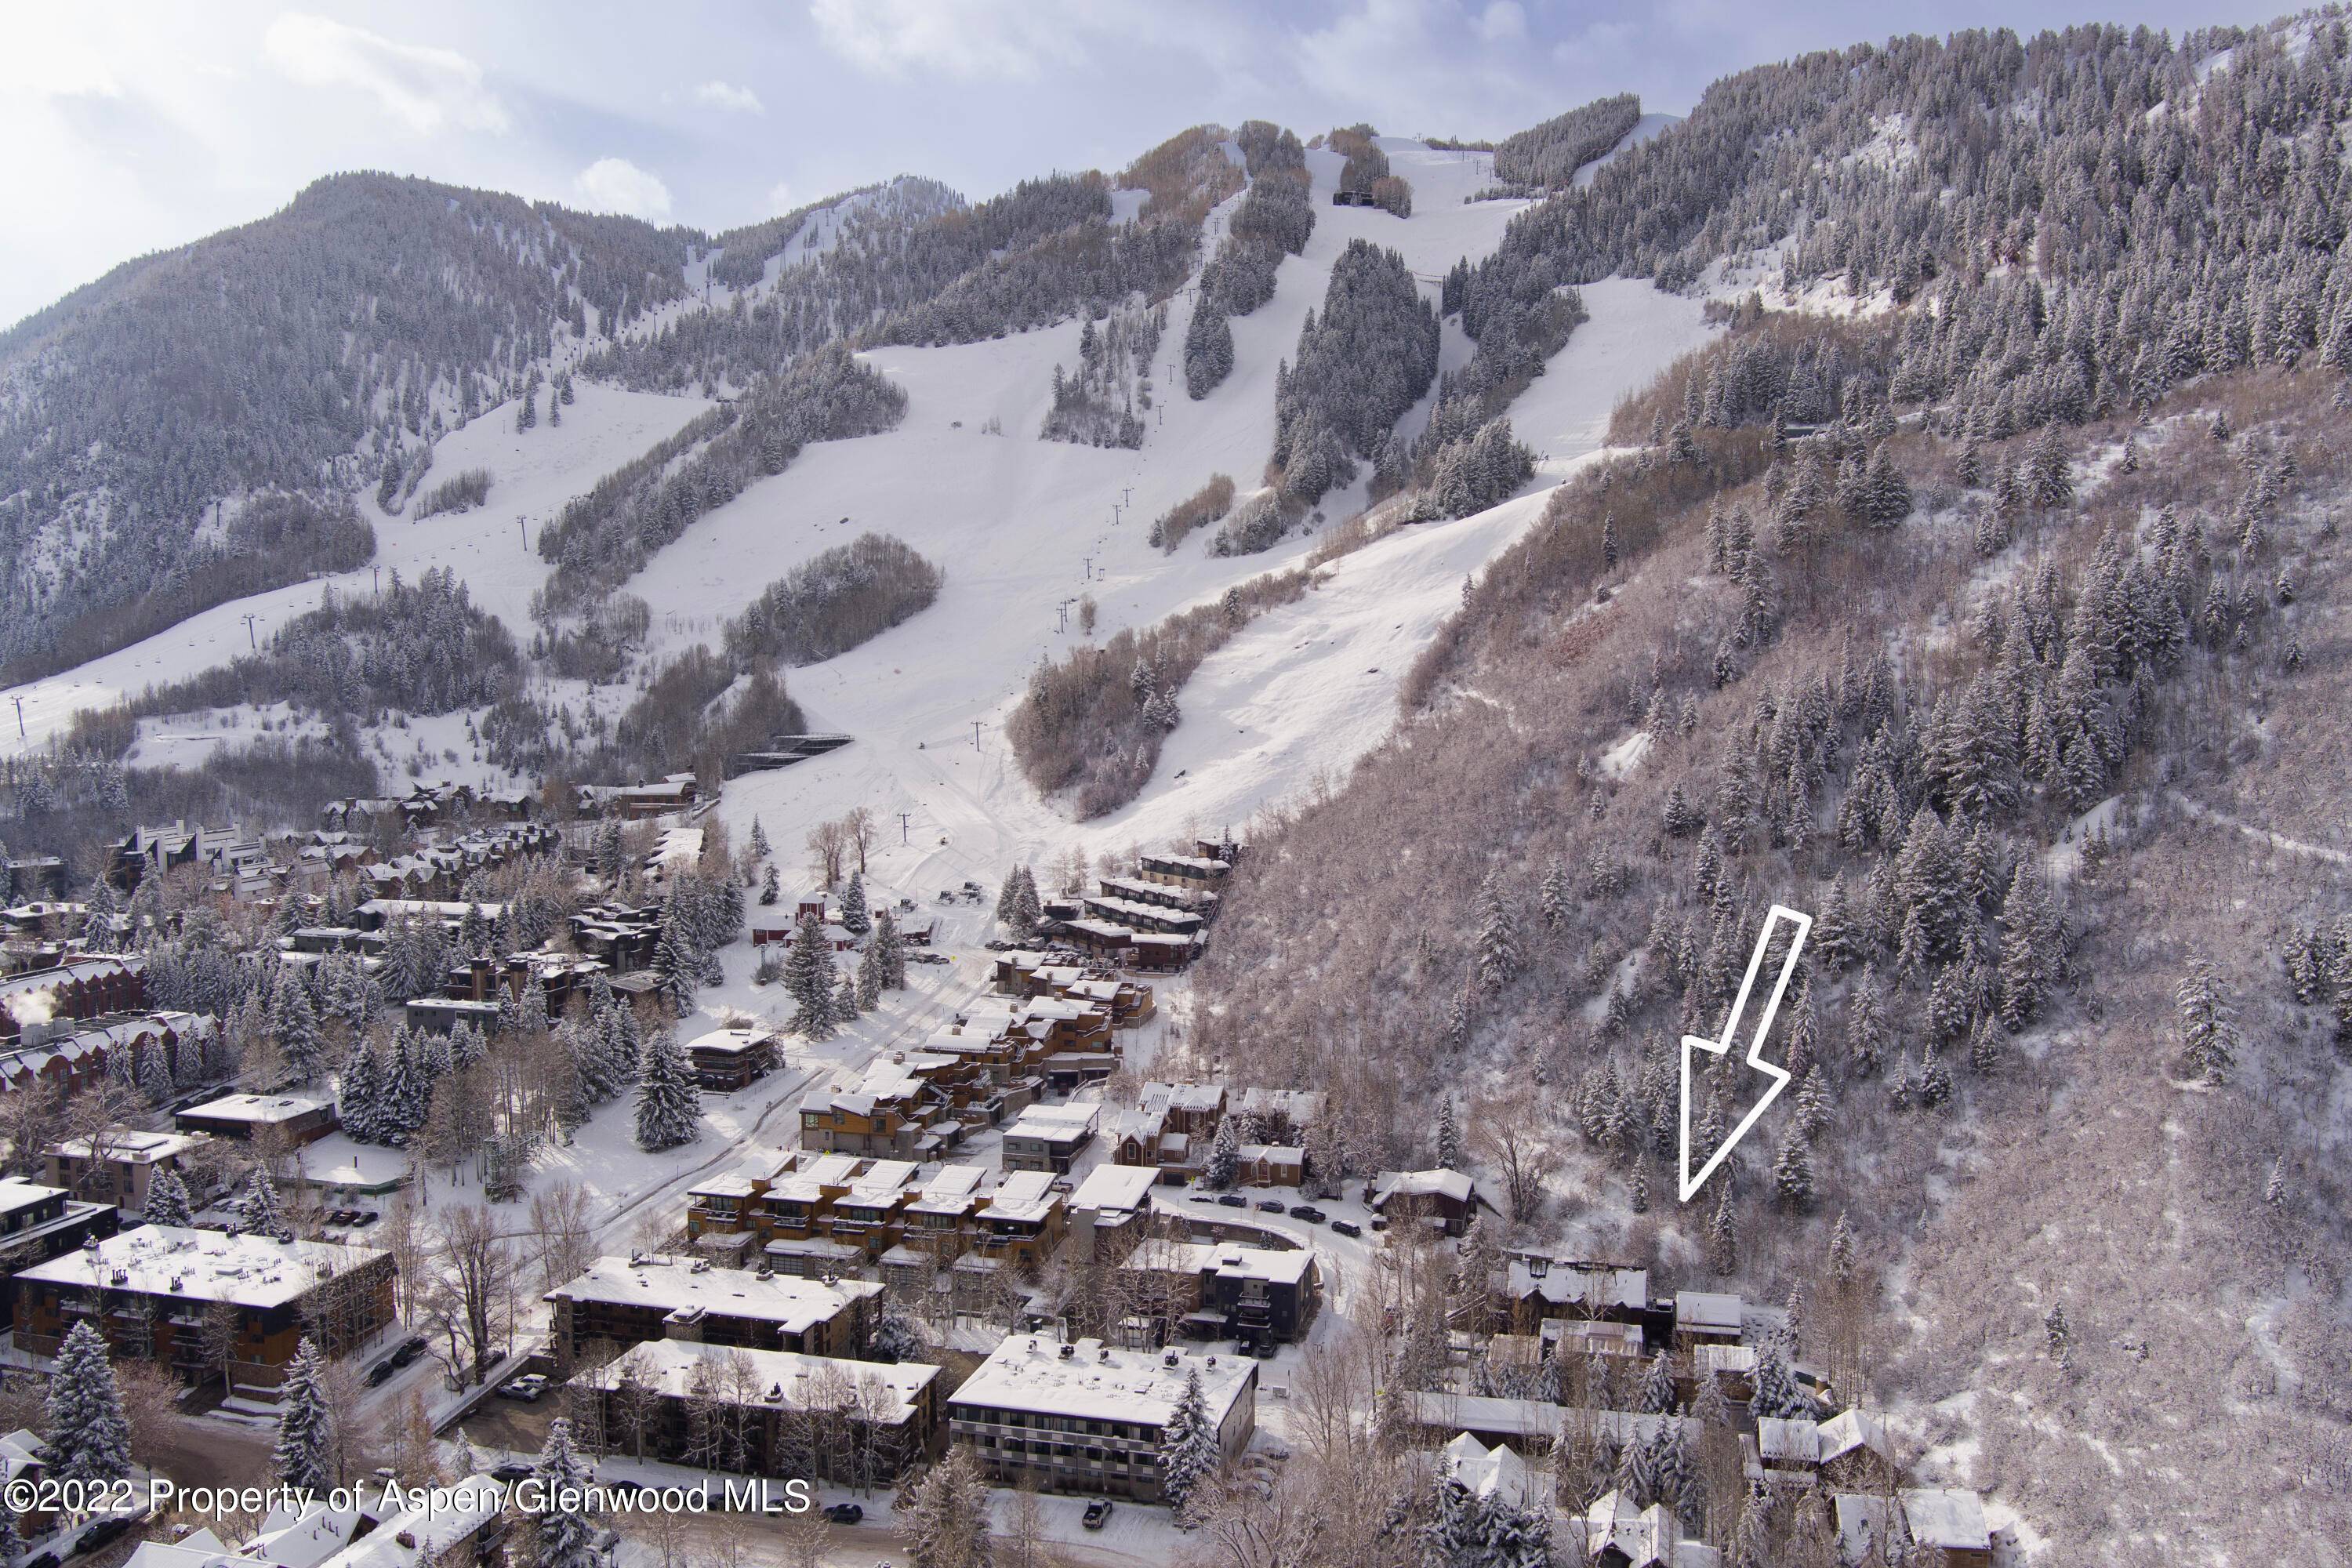 This is it, the only undeveloped single family property in the Lift 1 Aspen Mountain base area.